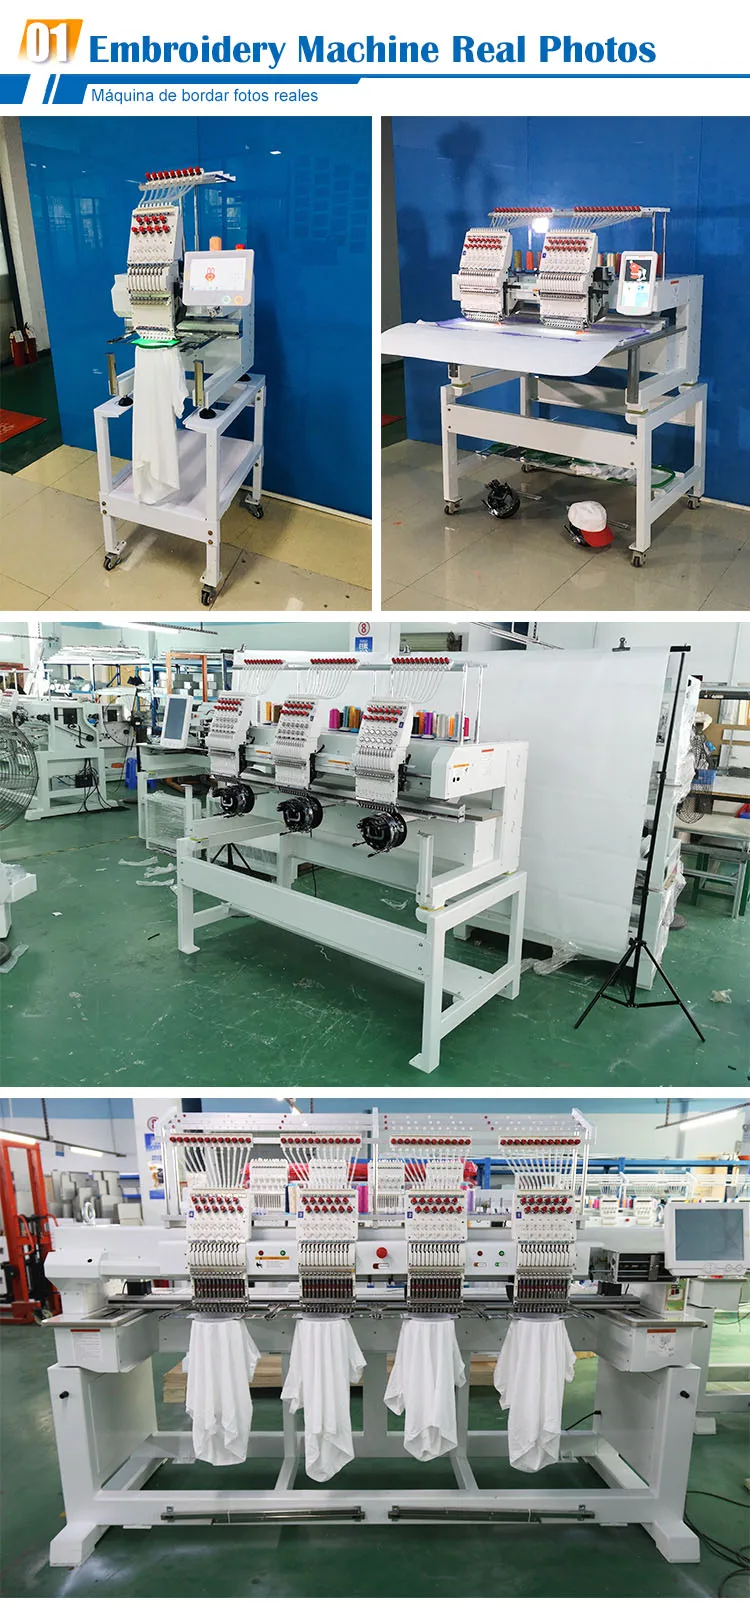 multi head chainstitch cording embroidery machine monogram Machine,bed sheets t shirt socks embroidery machine for clothes